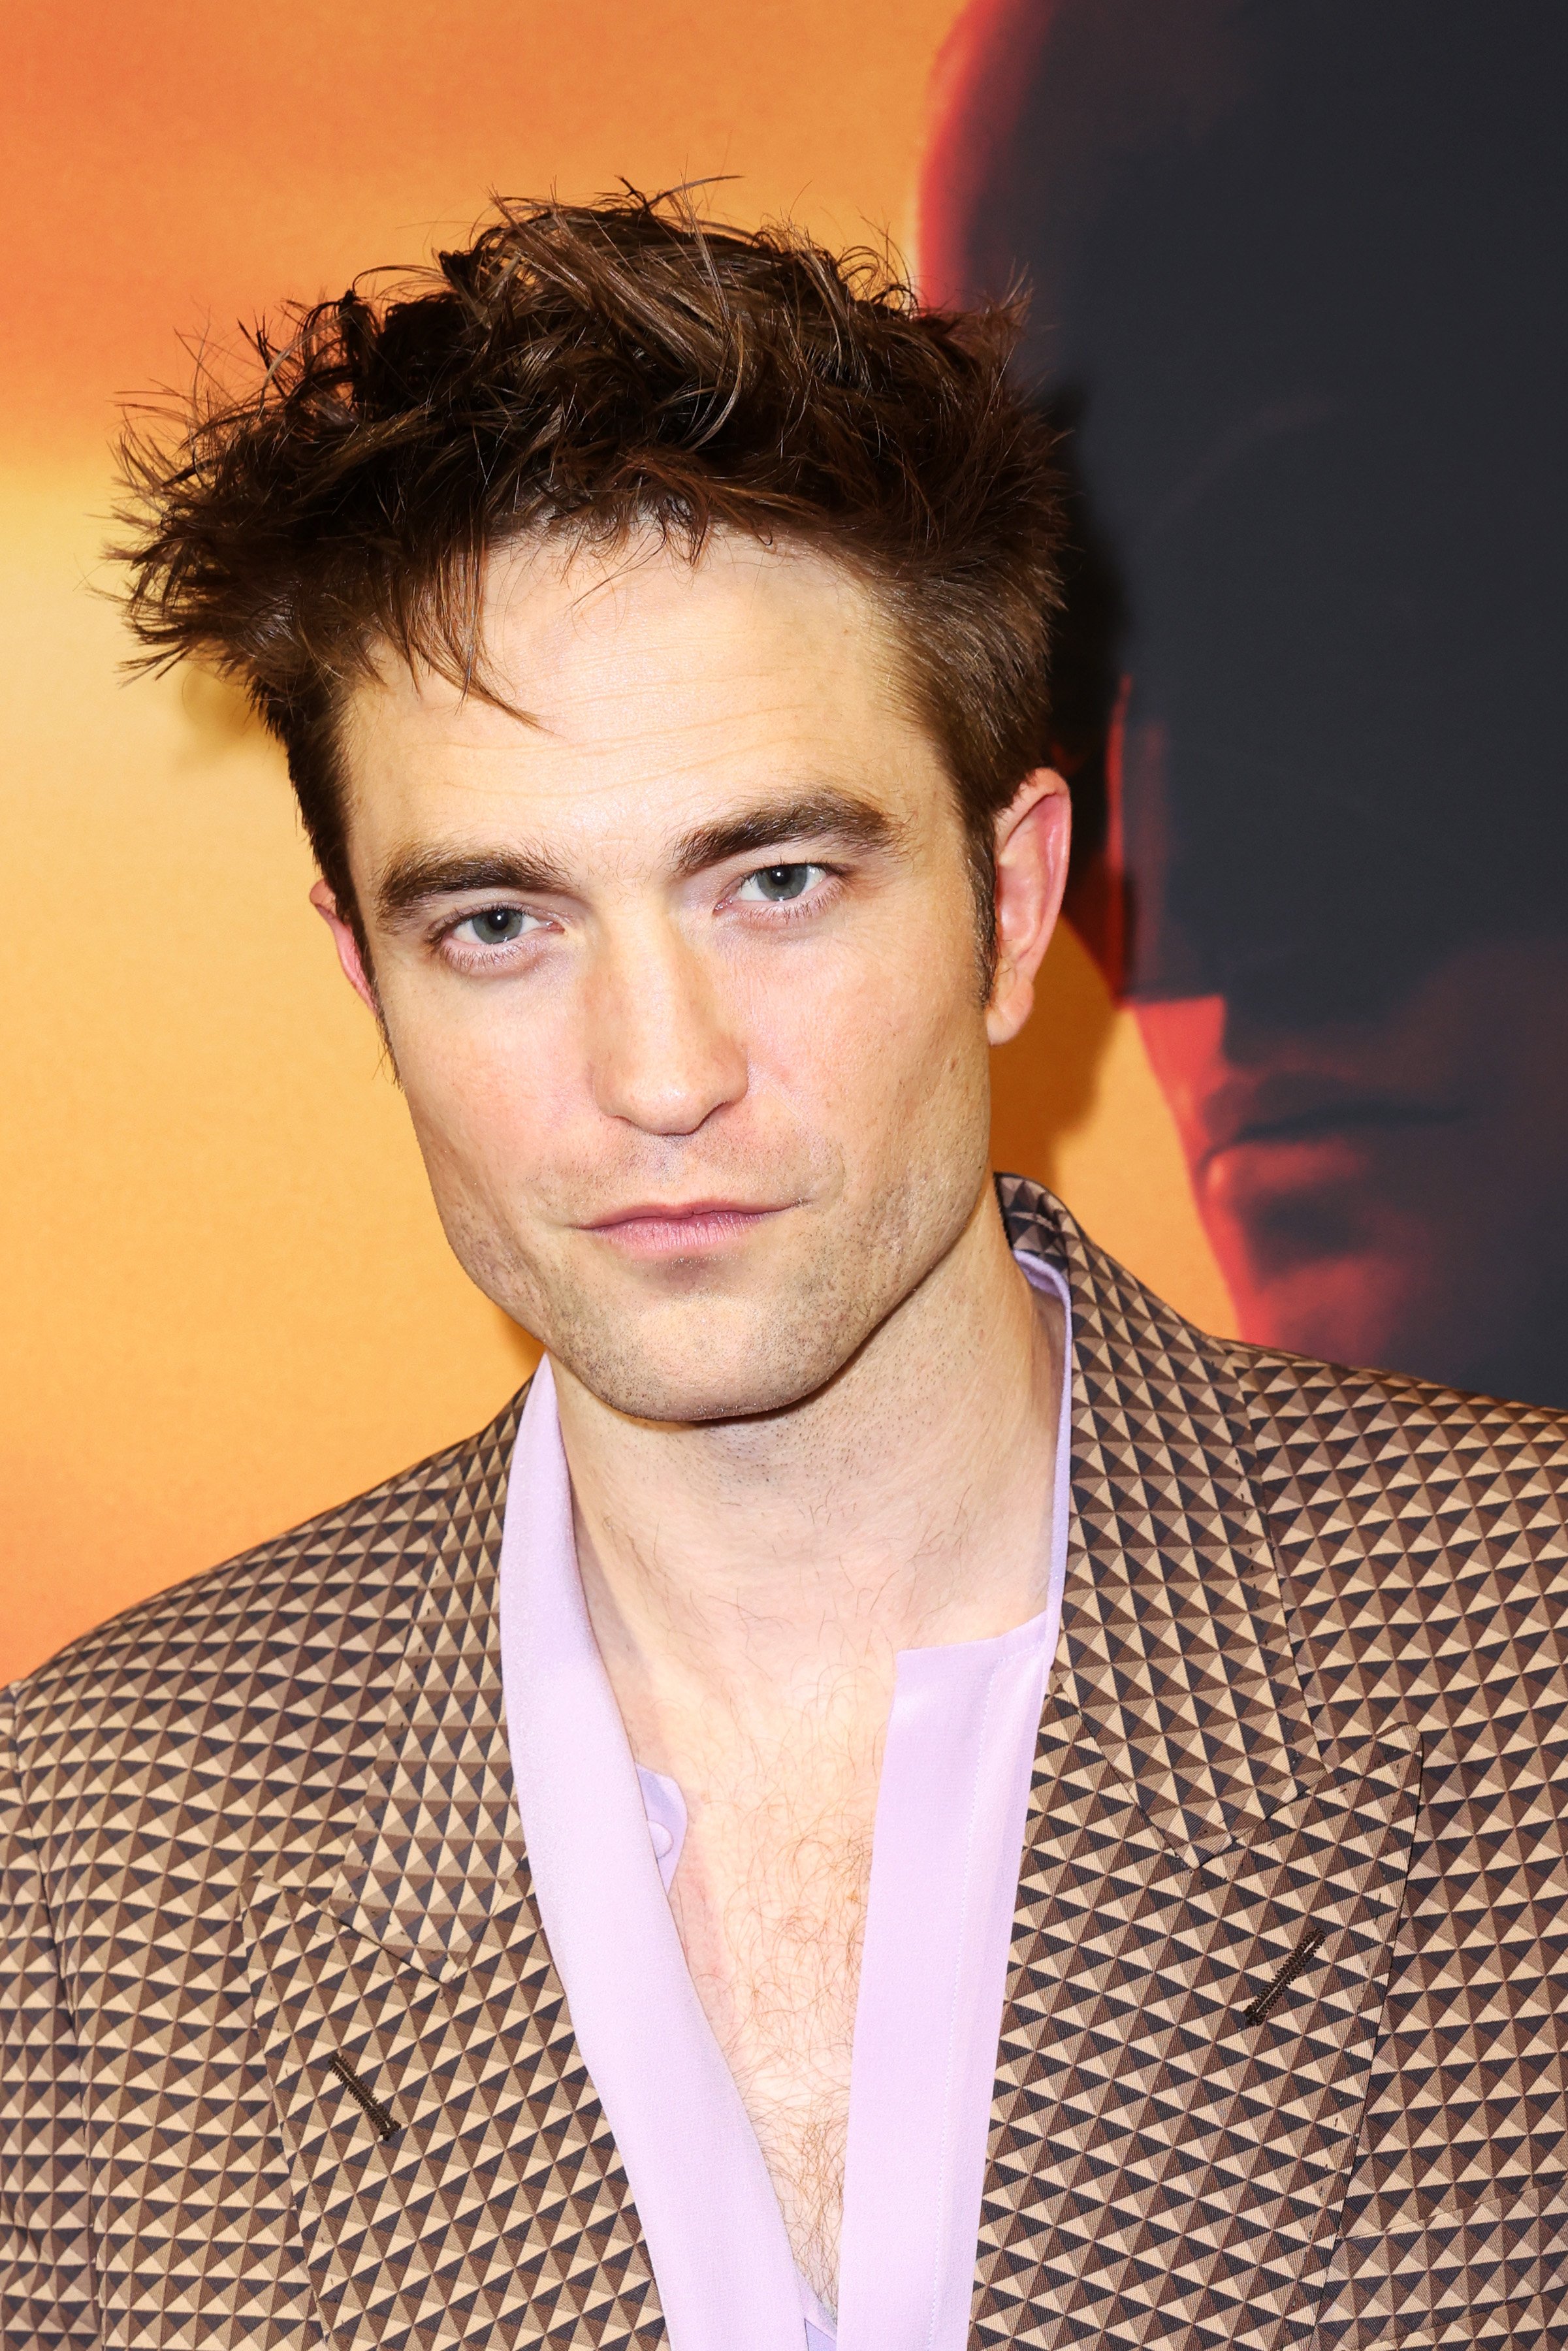 Robert Pattinson at "The Batman's" Miami Fan screening on February 27, 2022, in South Miami, Florida. | Source: Getty Images